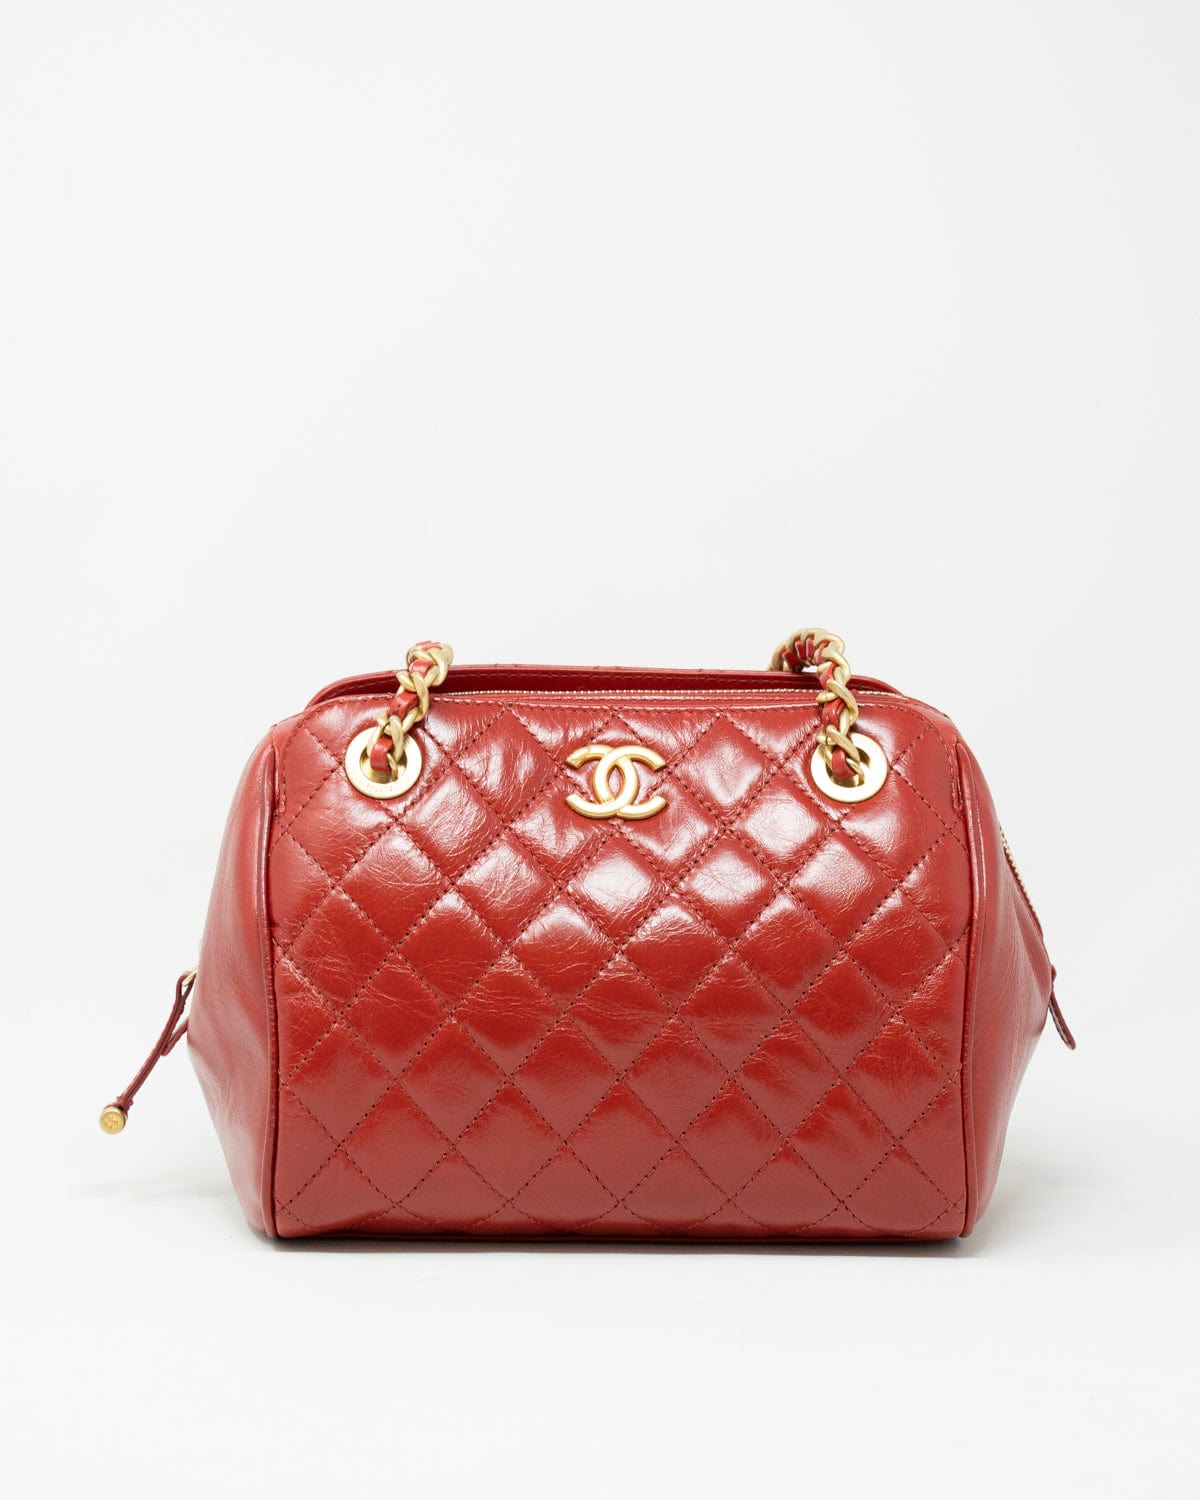 Chanel Chanel Red Goatskin Quilted Leather Tote Bag GHW  - AGL1707